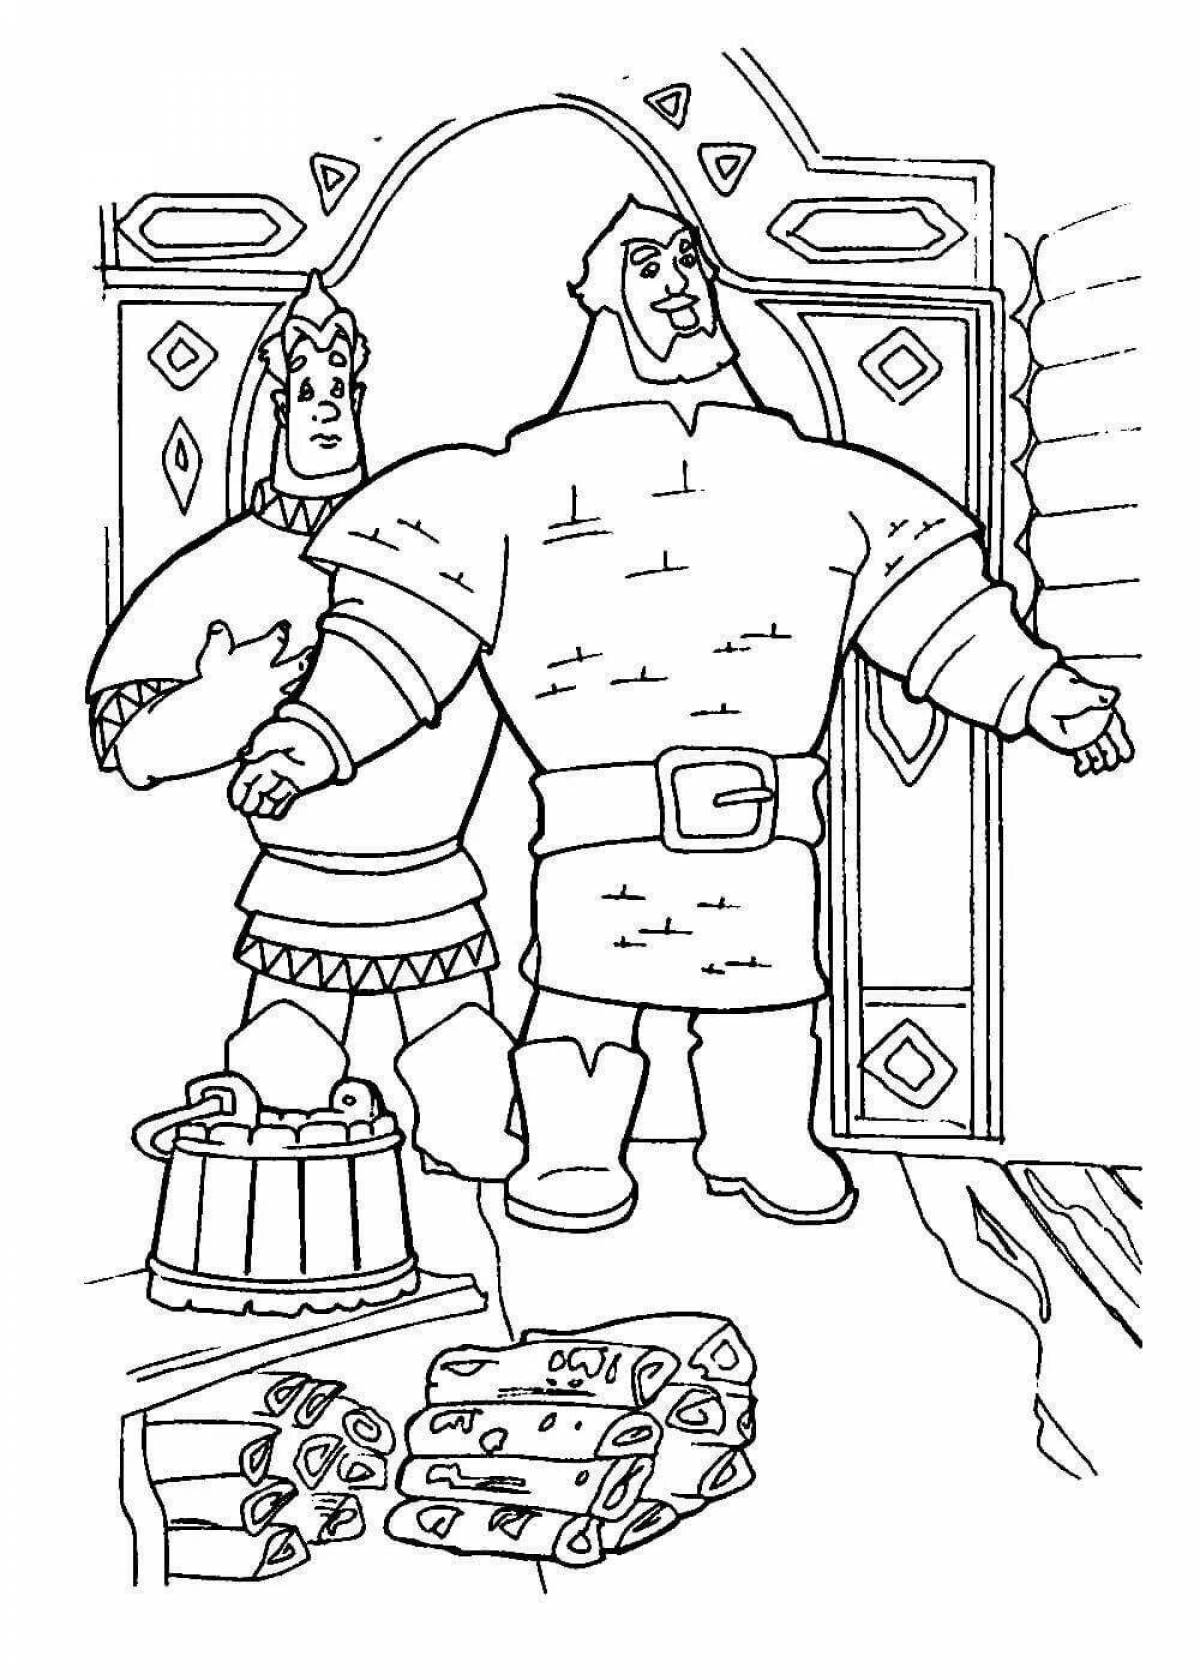 Dramatic coloring page 3 game heroes